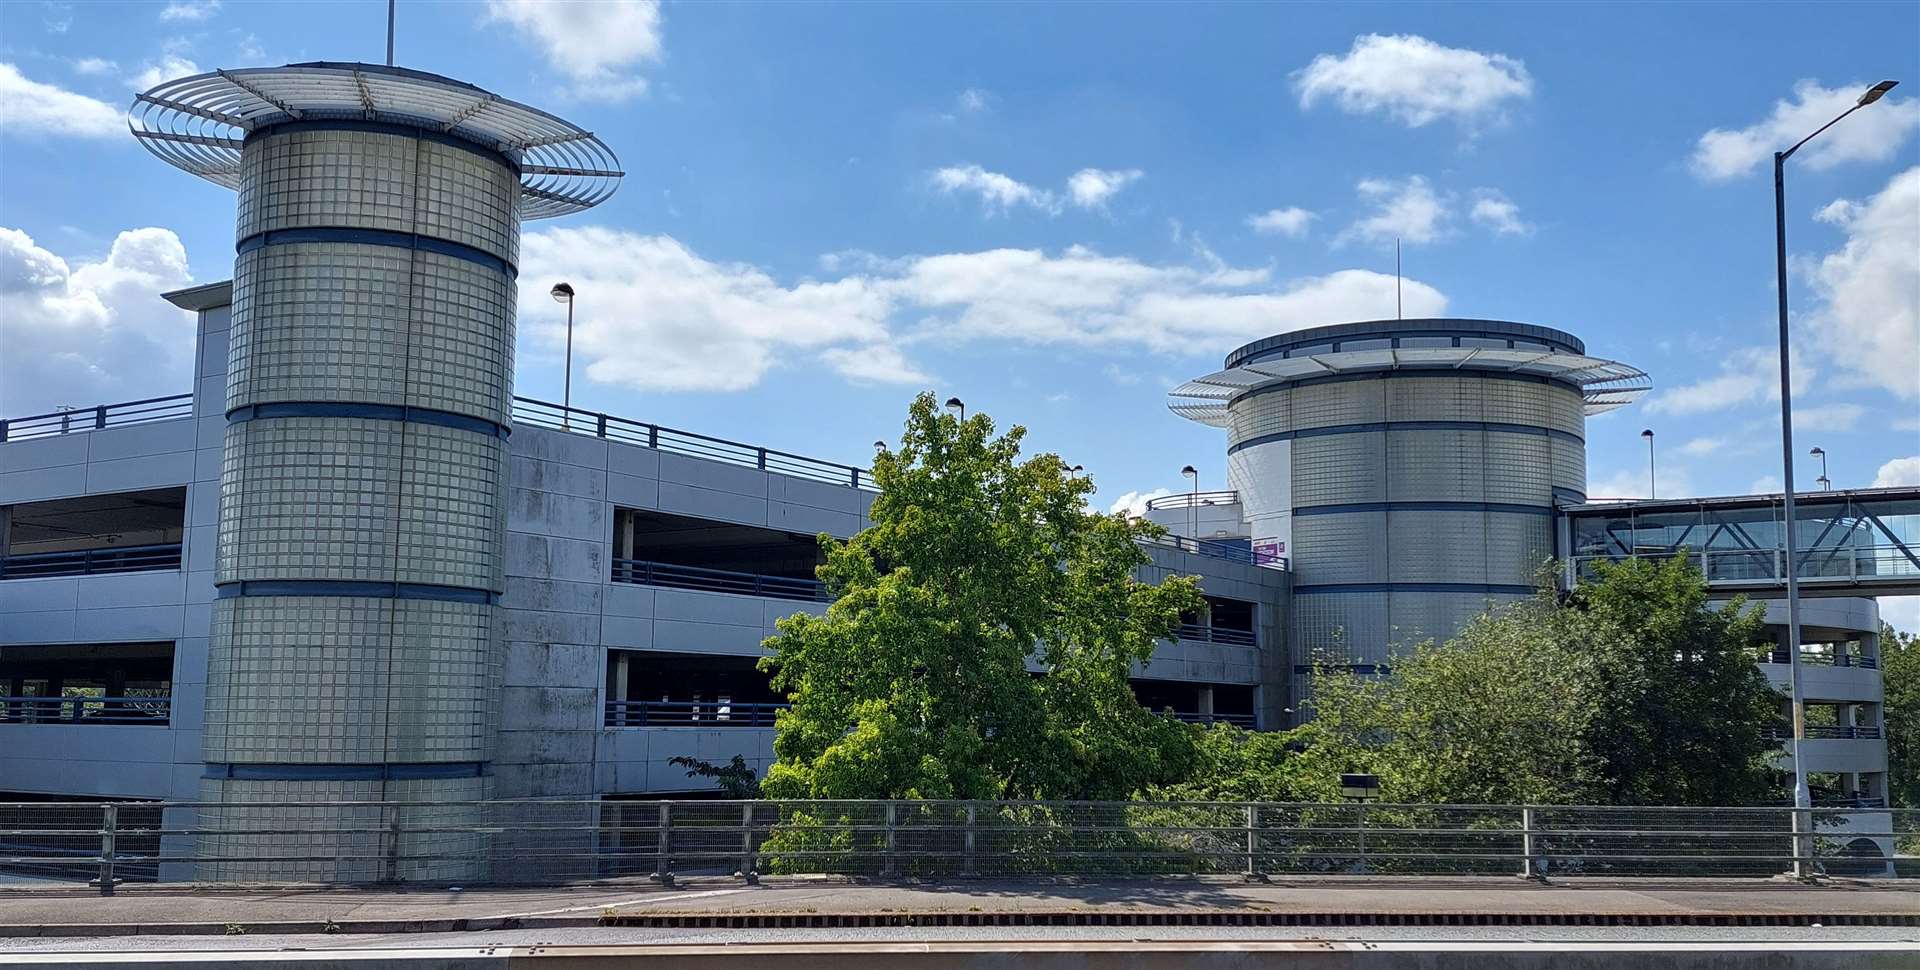 The largely empty Ashford International multi-storey car park – previously used by Eurostar passengers – is earmarked for Brompton factory staff